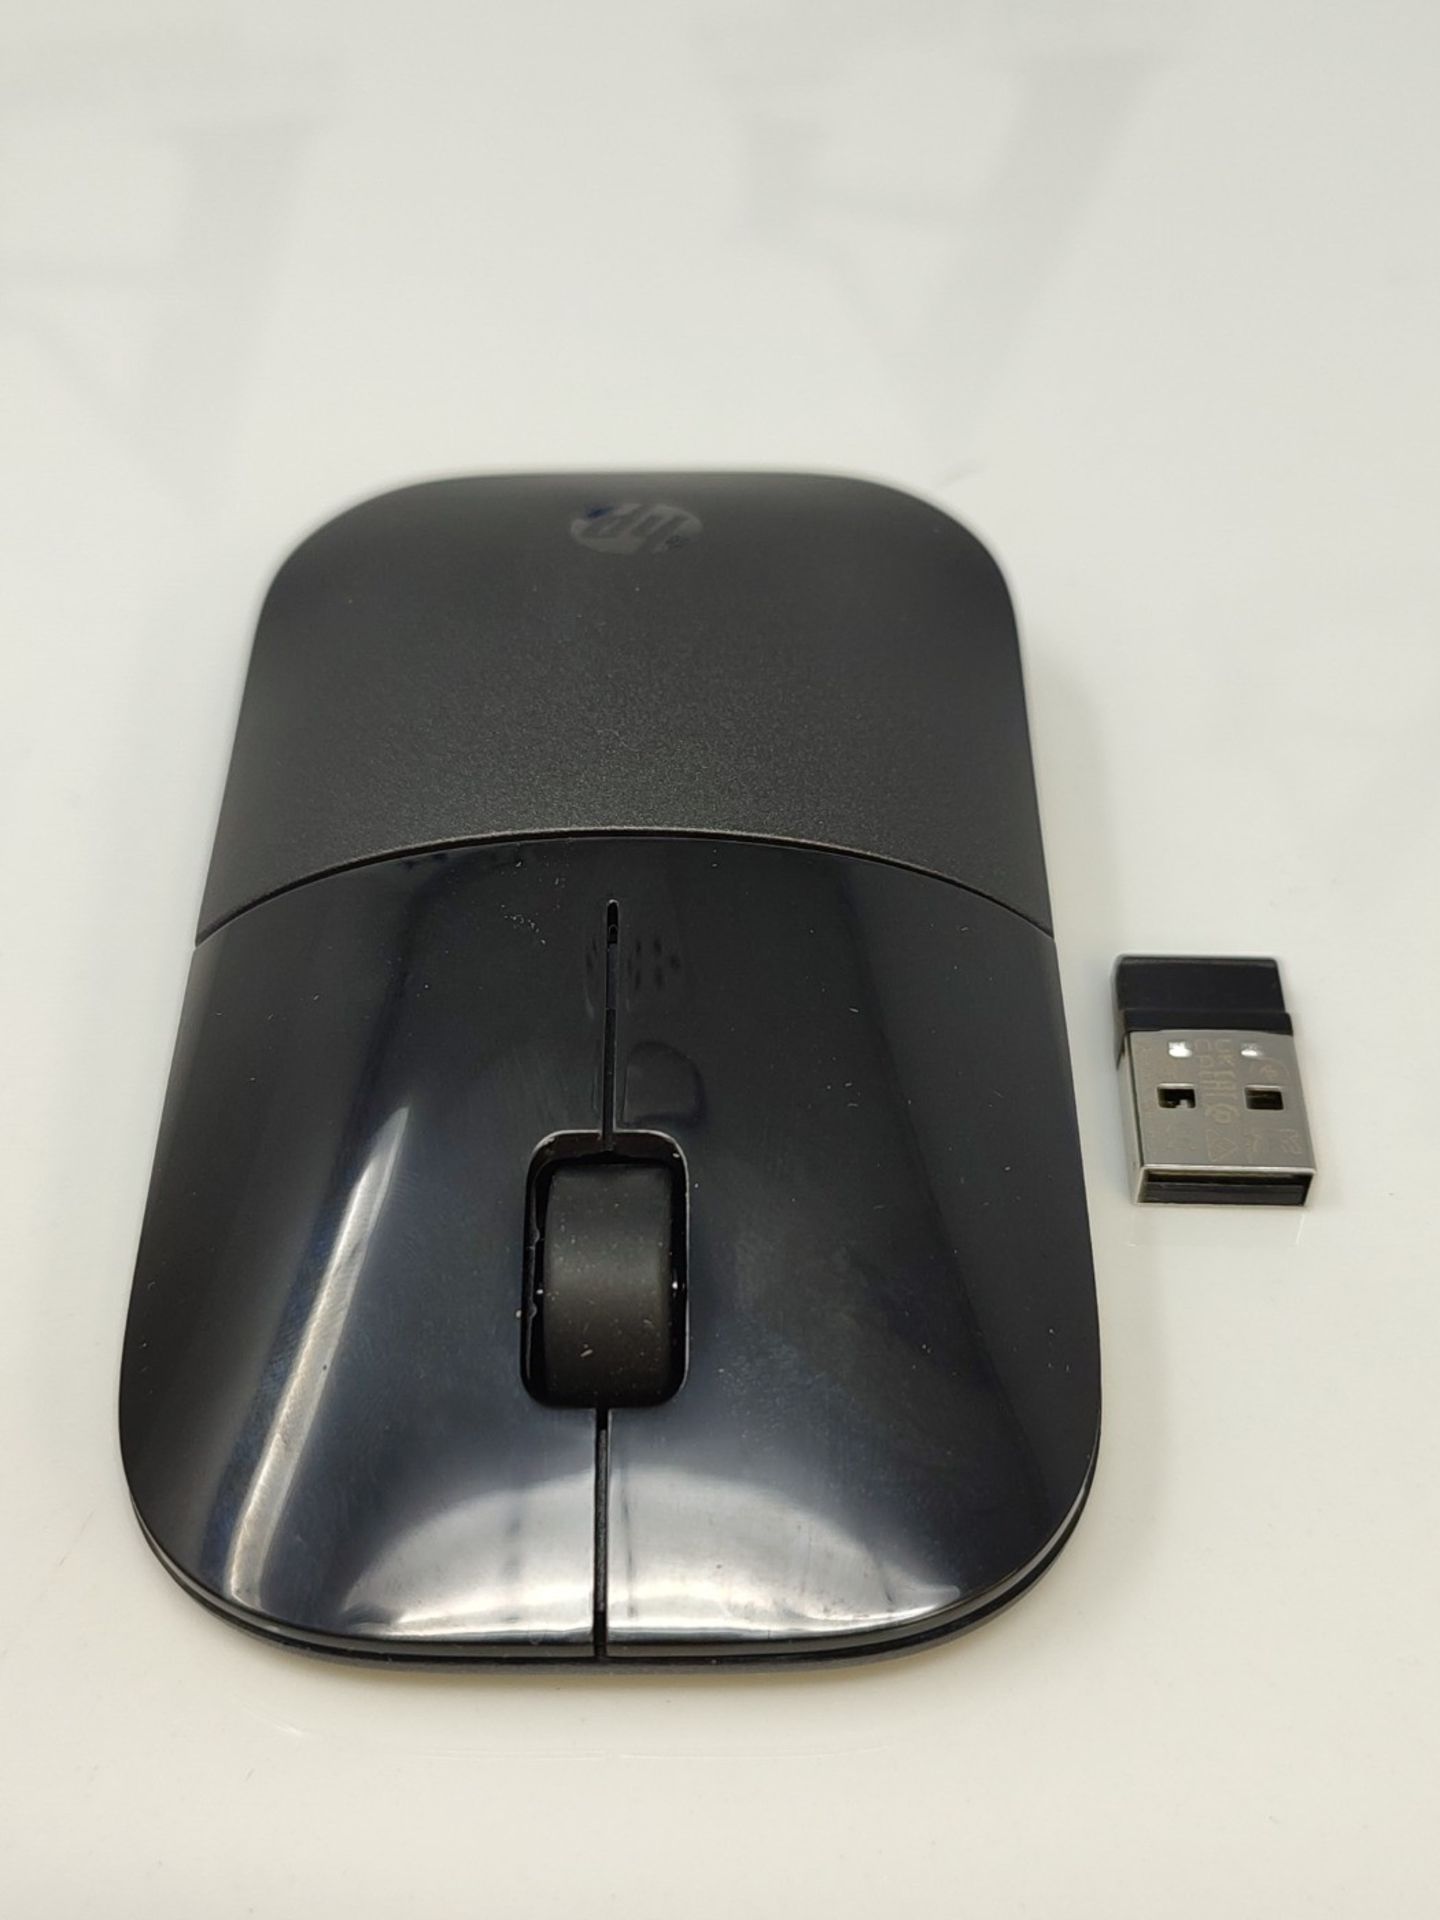 HP Z3700 wireless mouse | 1200 optical sensors | up to 16 months battery life | 2.4 GH - Image 3 of 3